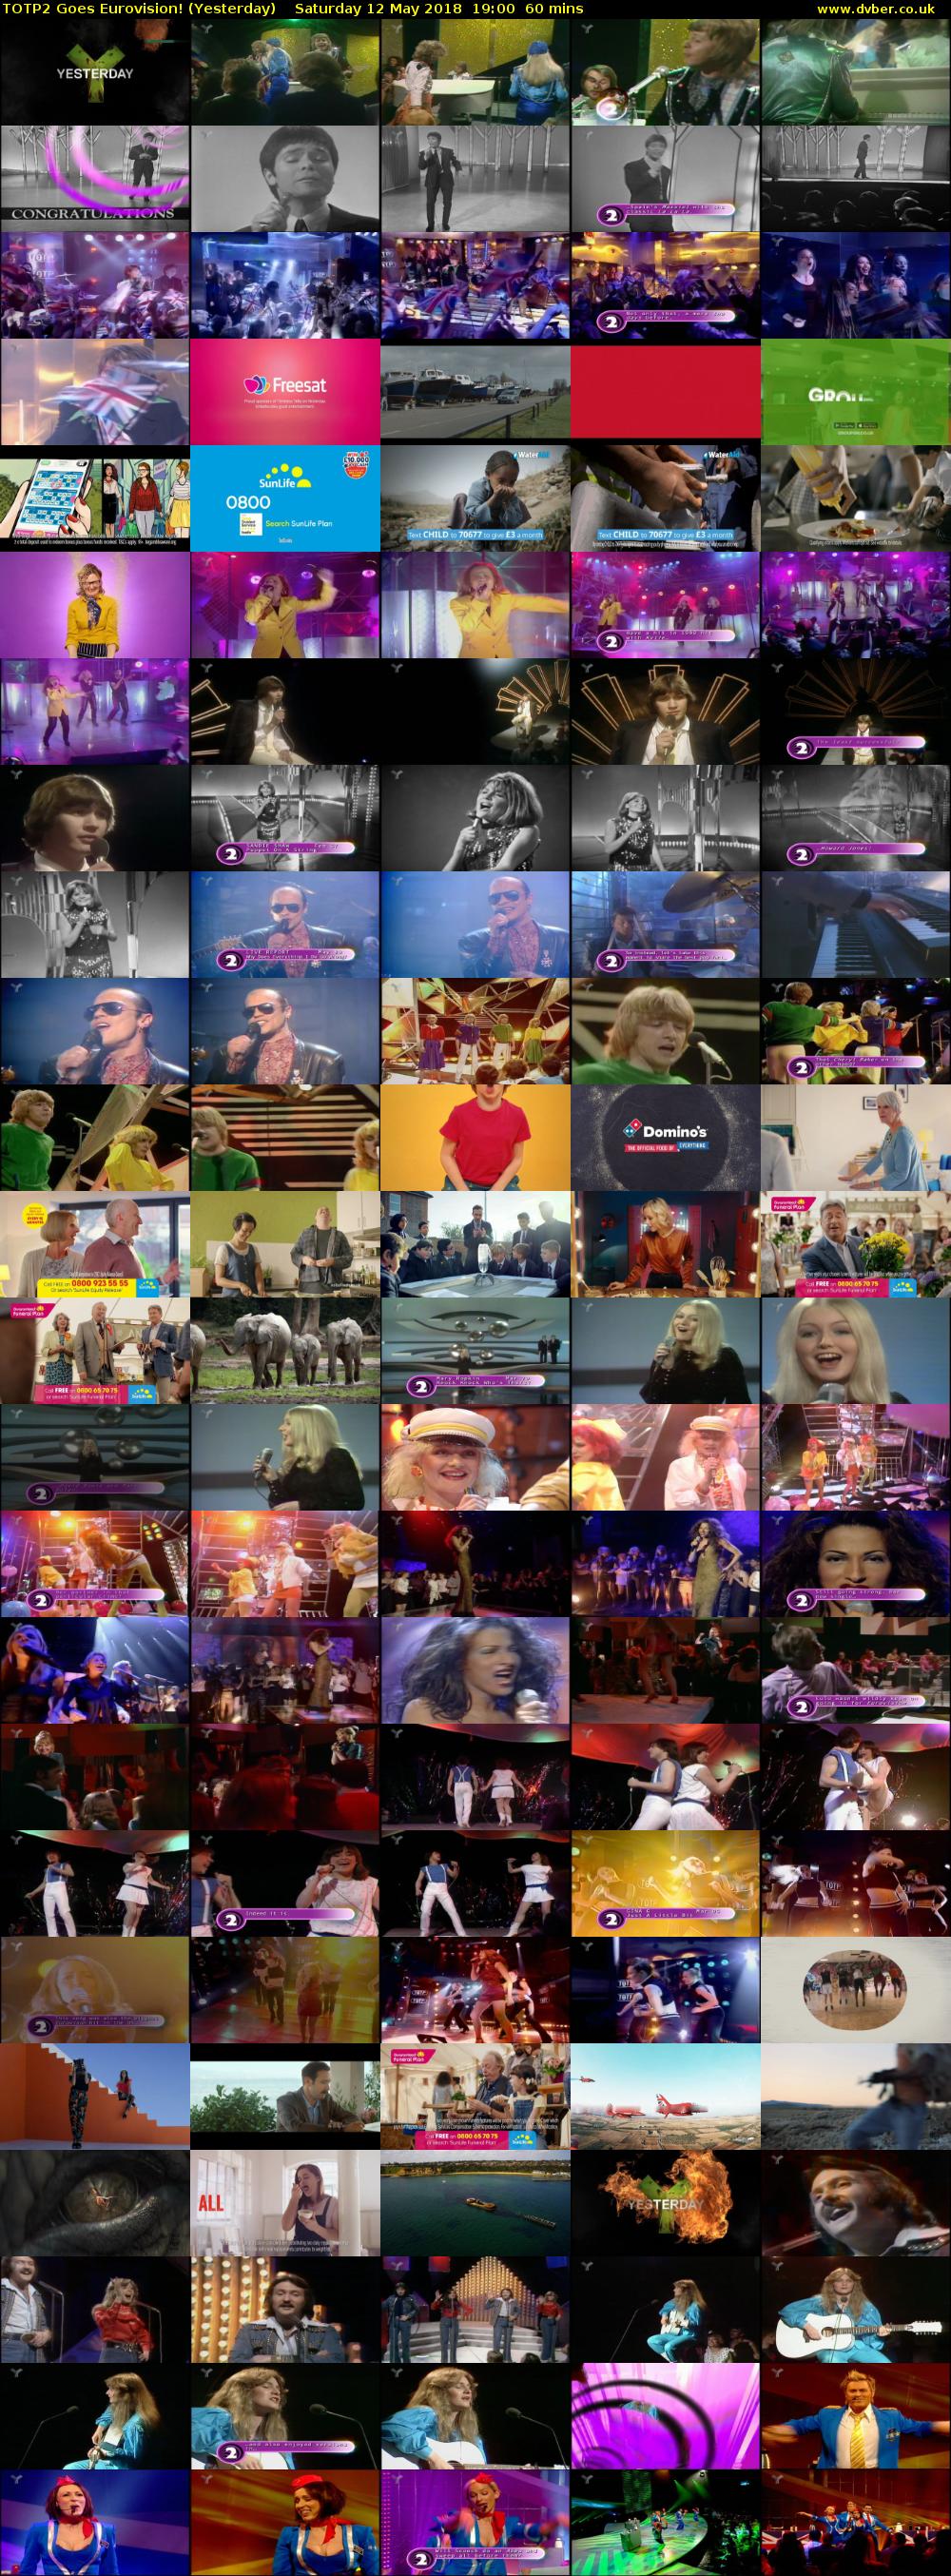 TOTP2 Goes Eurovision! (Yesterday) Saturday 12 May 2018 19:00 - 20:00